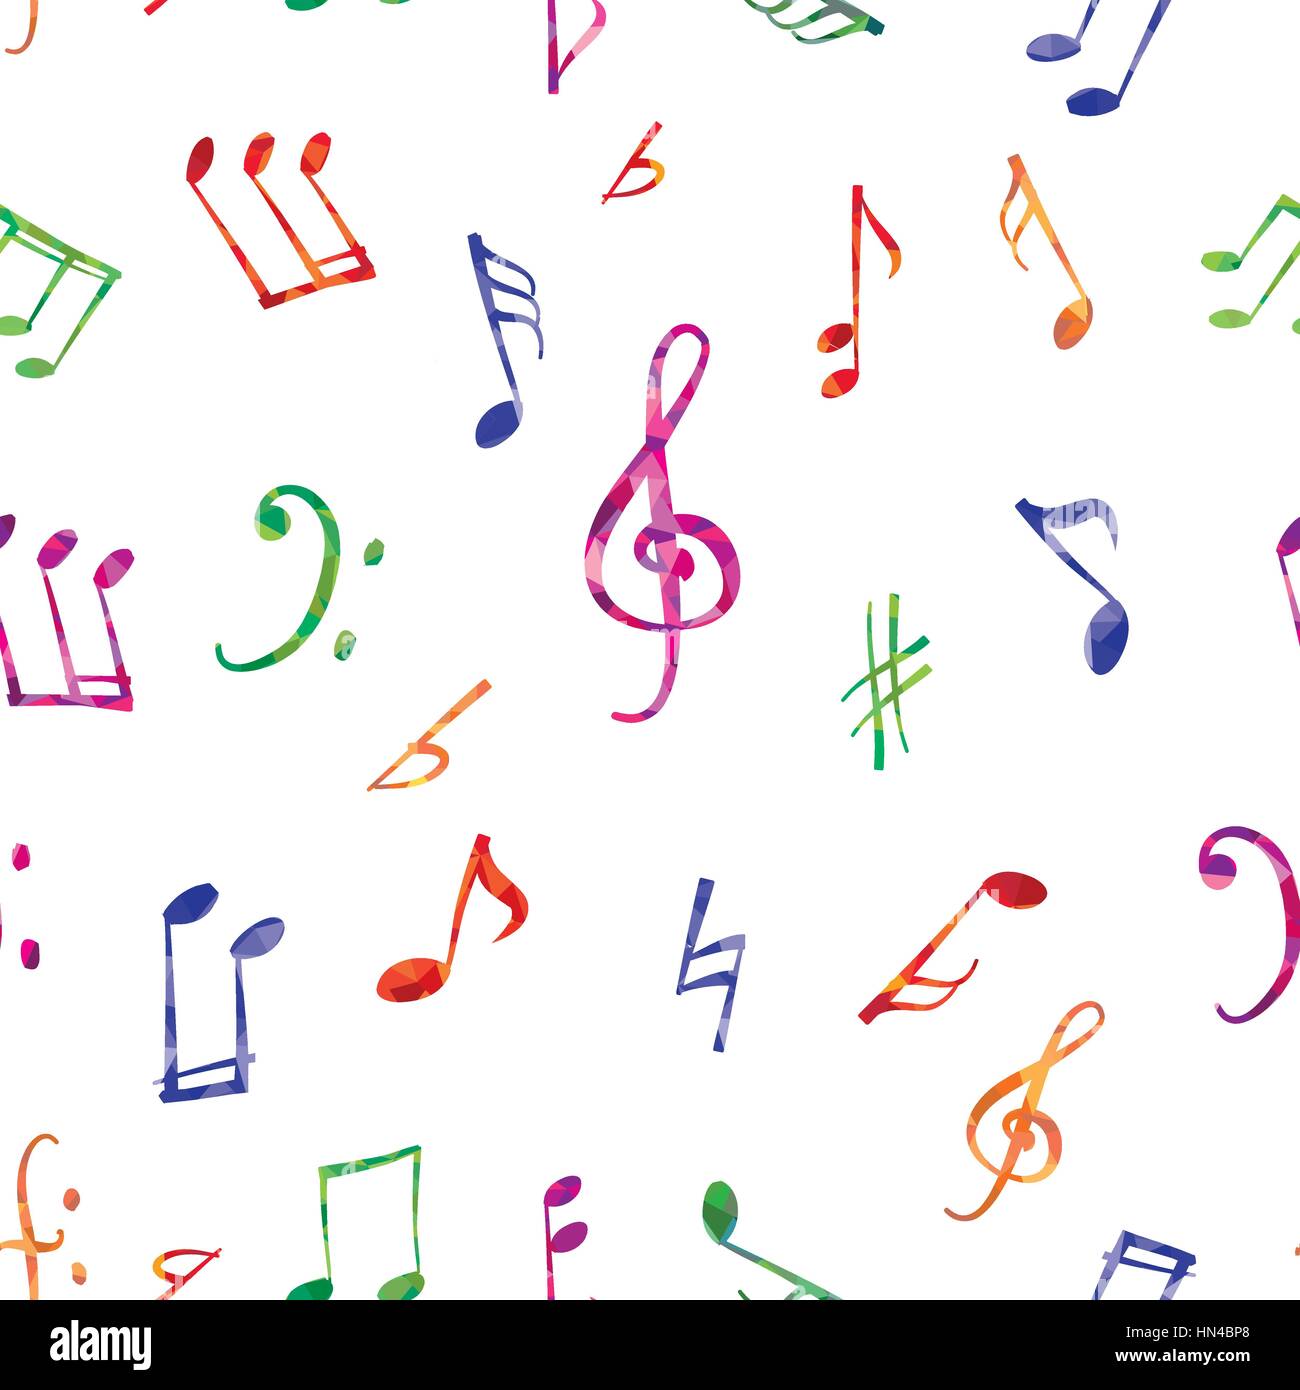 Musical pattern. Music notes and signs seamless background Stock Vector